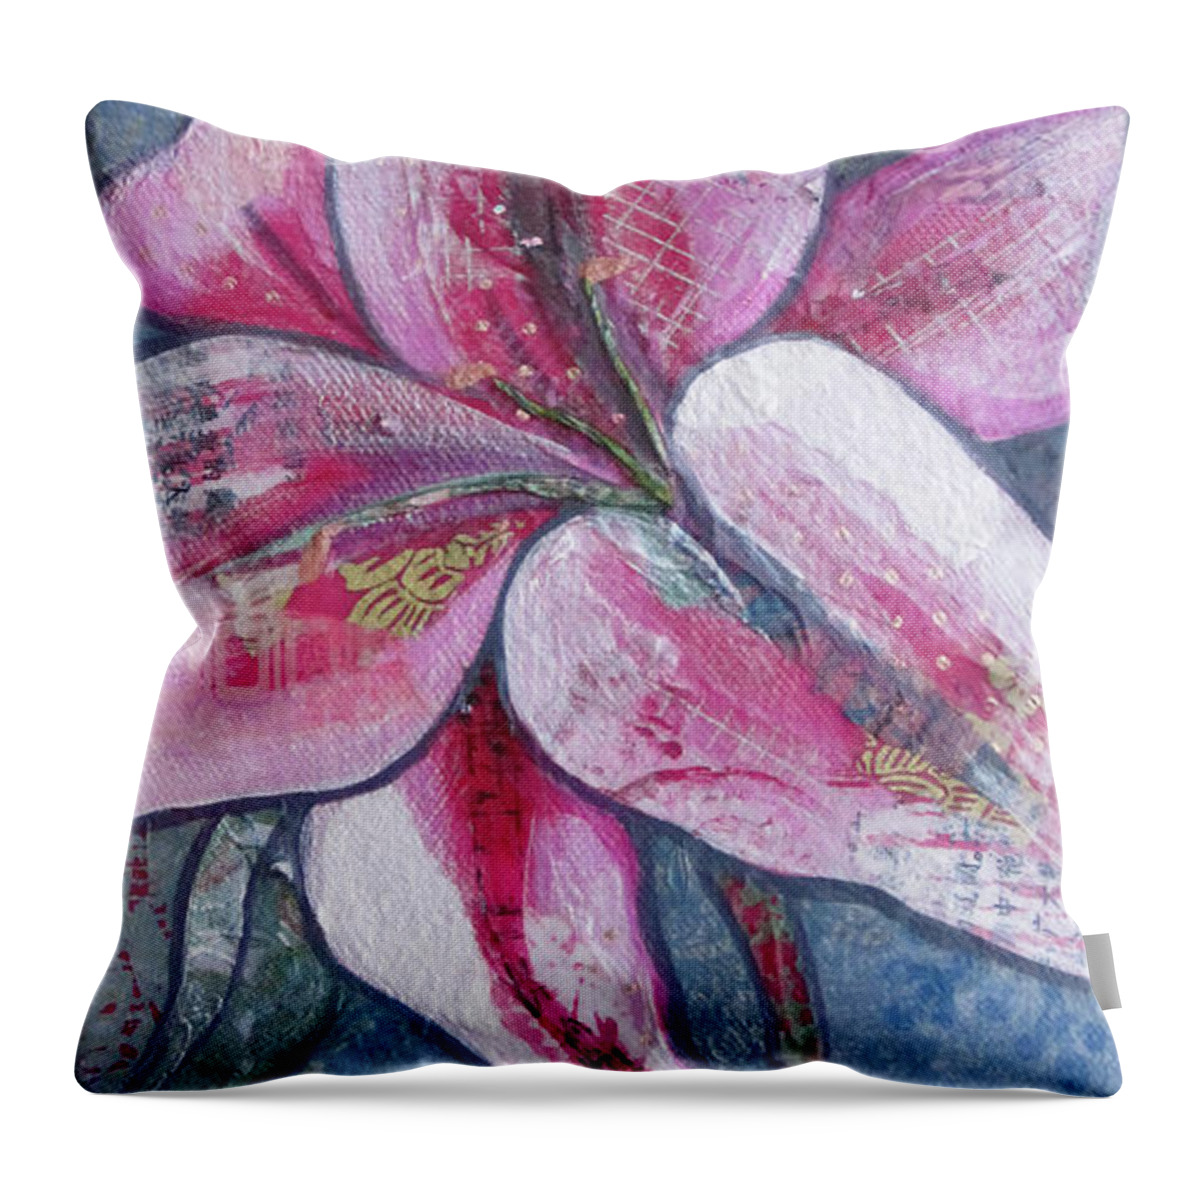 Star Throw Pillow featuring the painting Stargazer III by Shadia Derbyshire